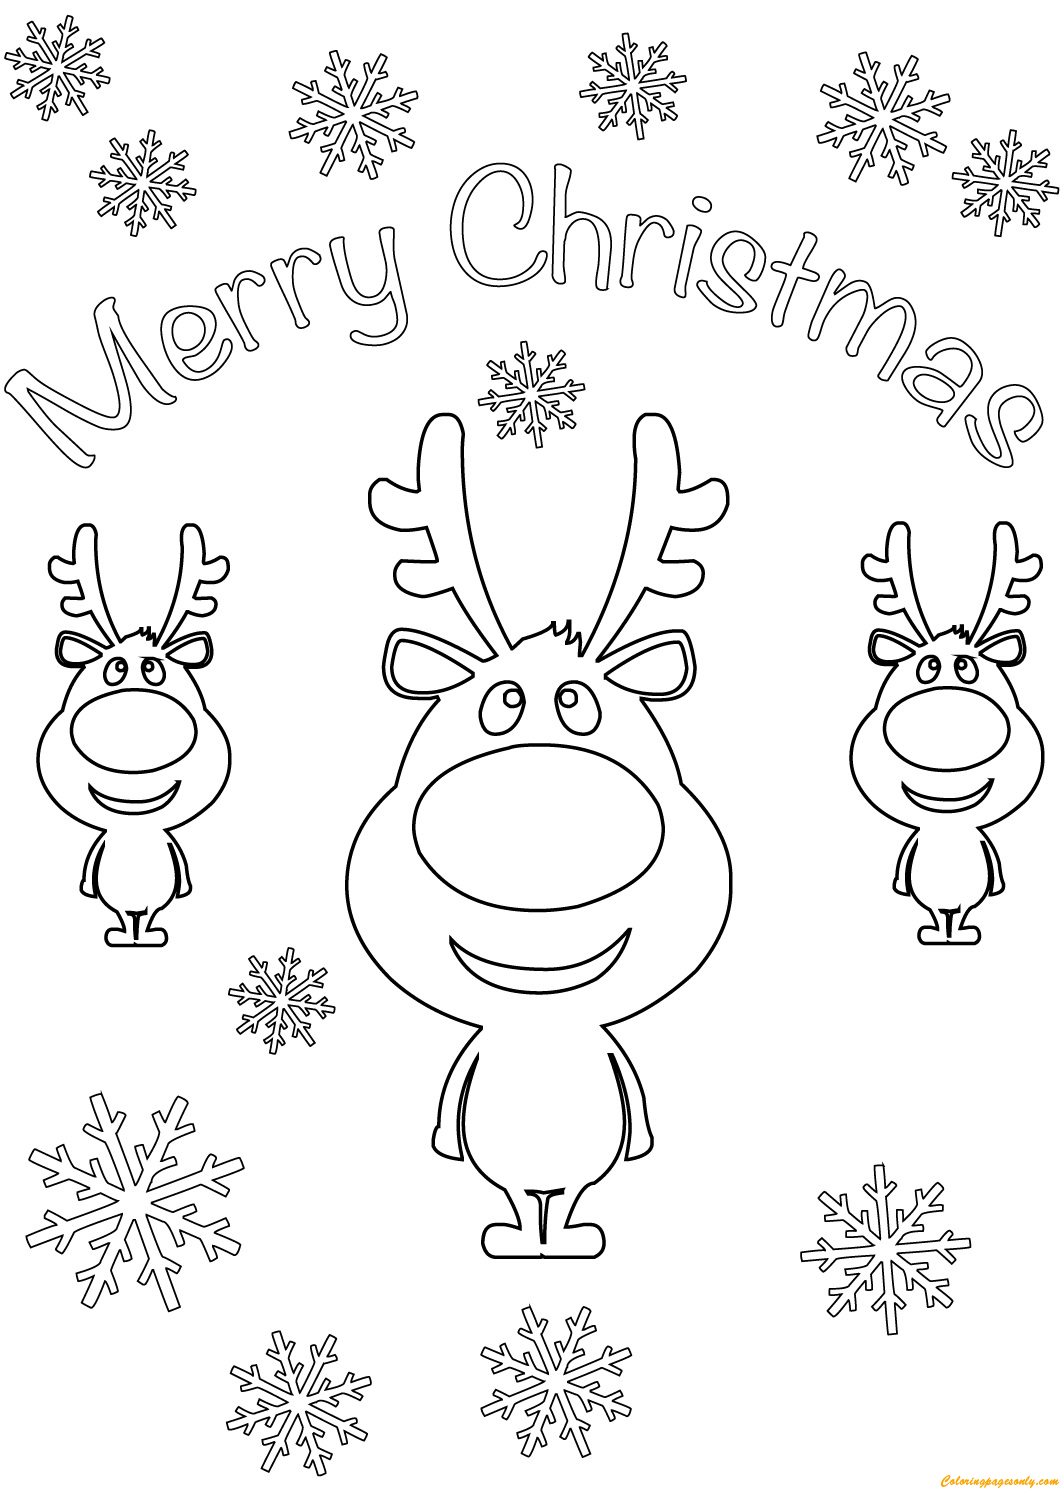 Reindeer Merry Christmas Cards Coloring Page Free Printable Coloring Pages